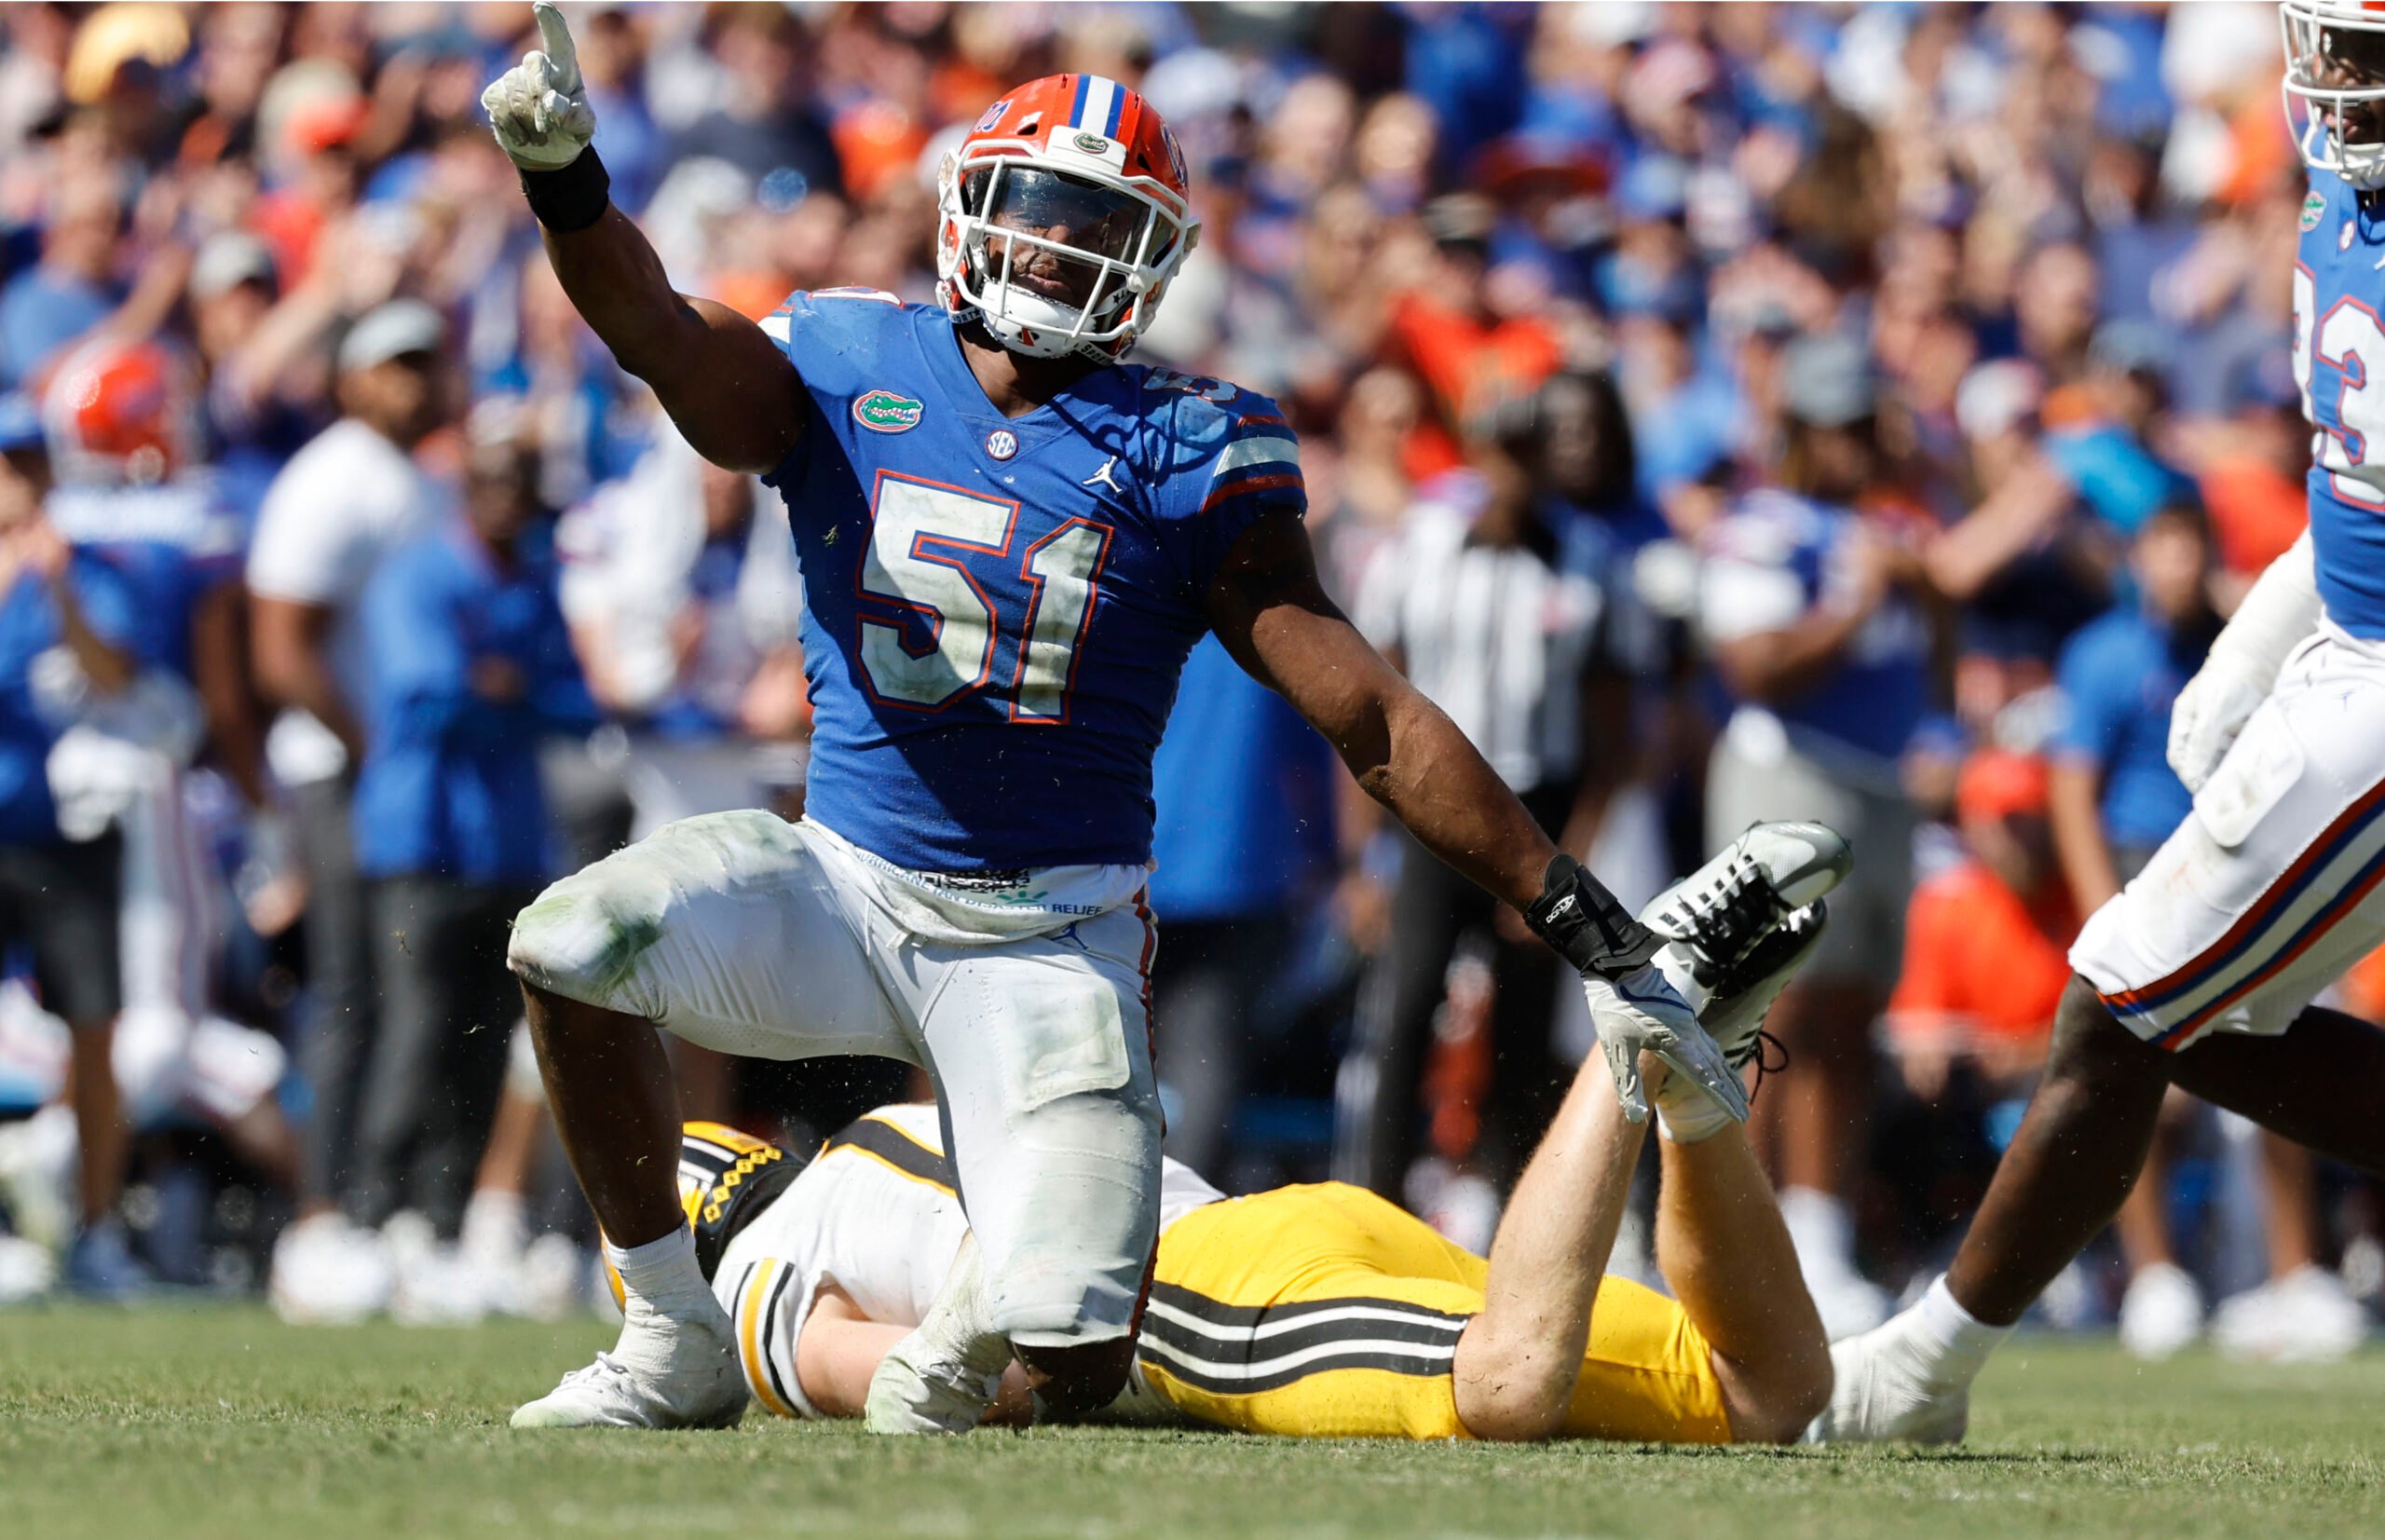 2023 NFL Draft prospects: Ranking top defensive ends in this year's draft  class - DraftKings Network